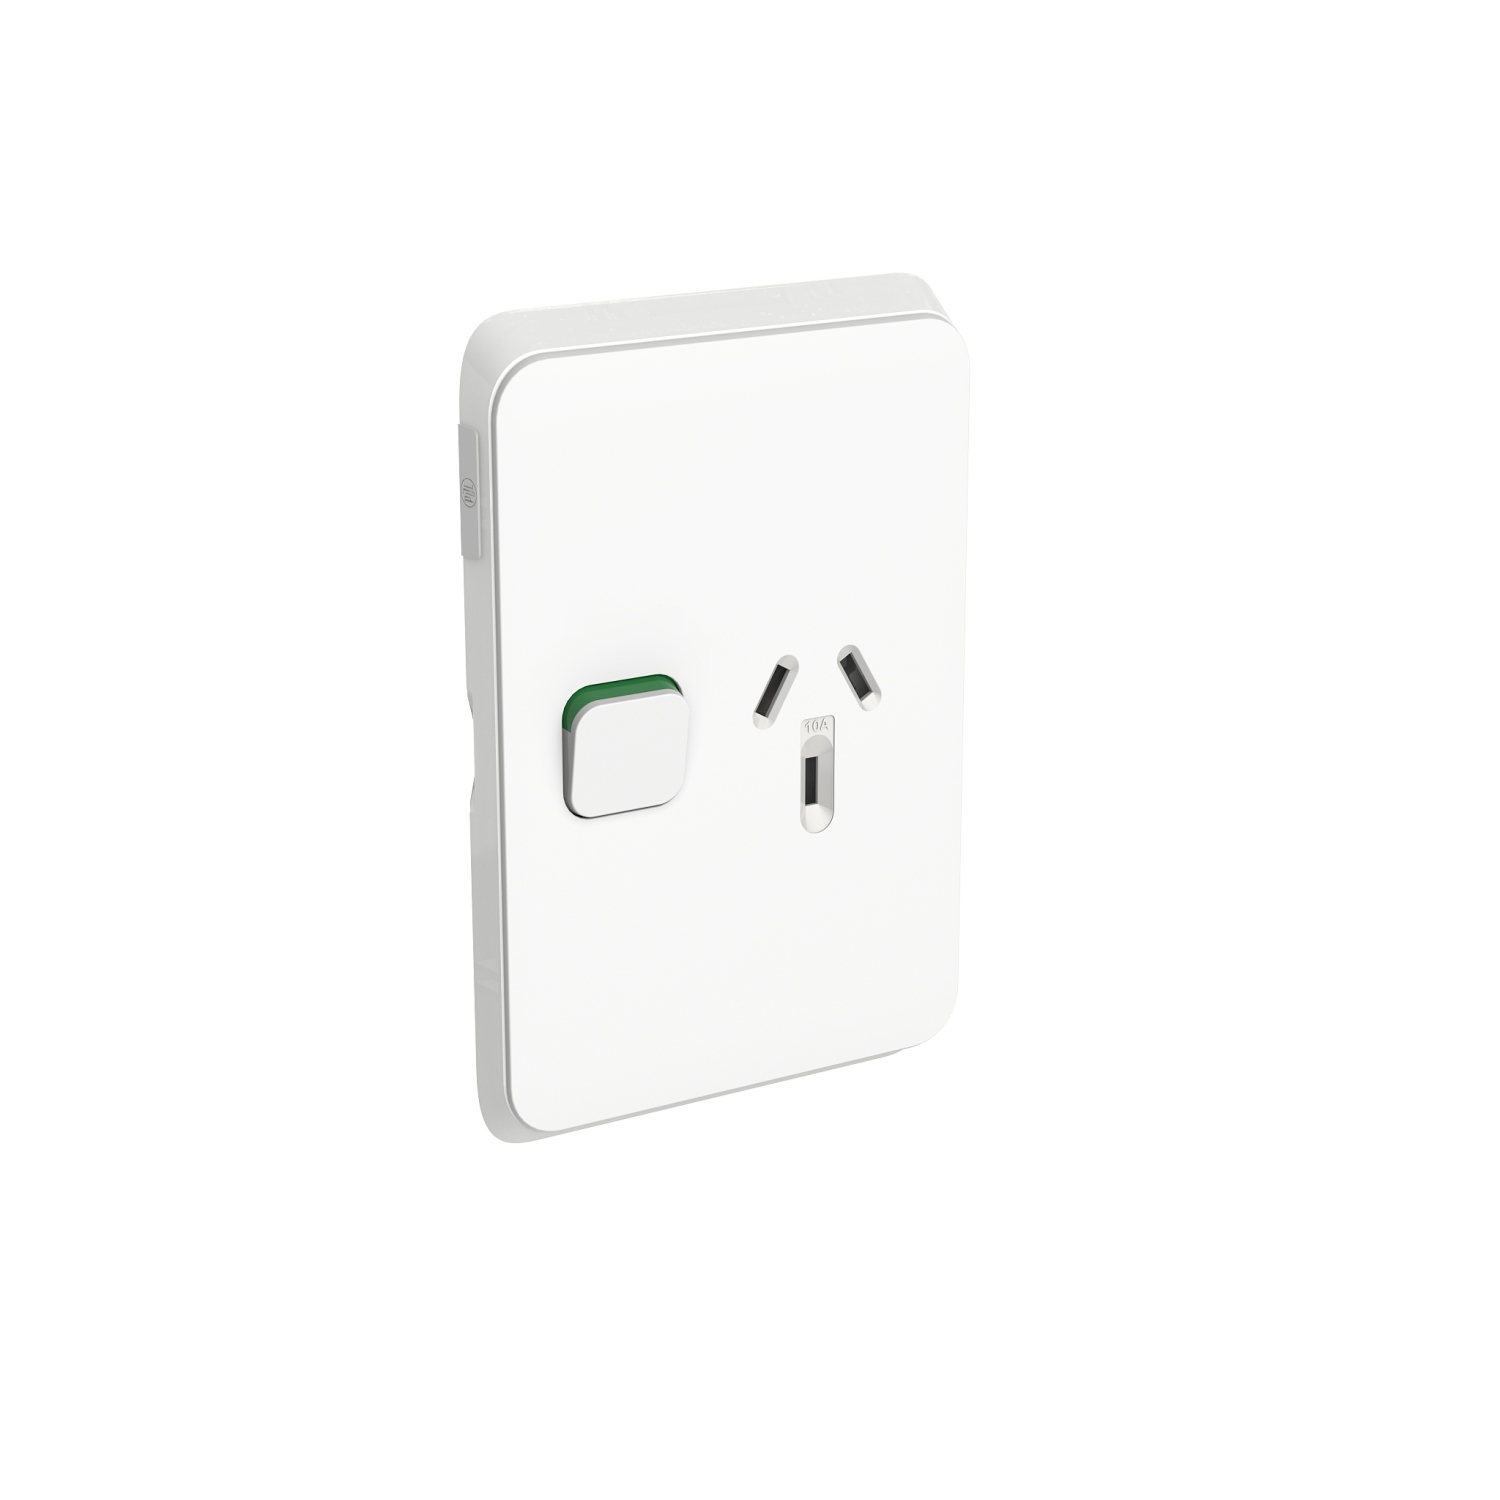 PDL Iconic - Cover Plate Switched Socket 10A Vertical - Vivid White